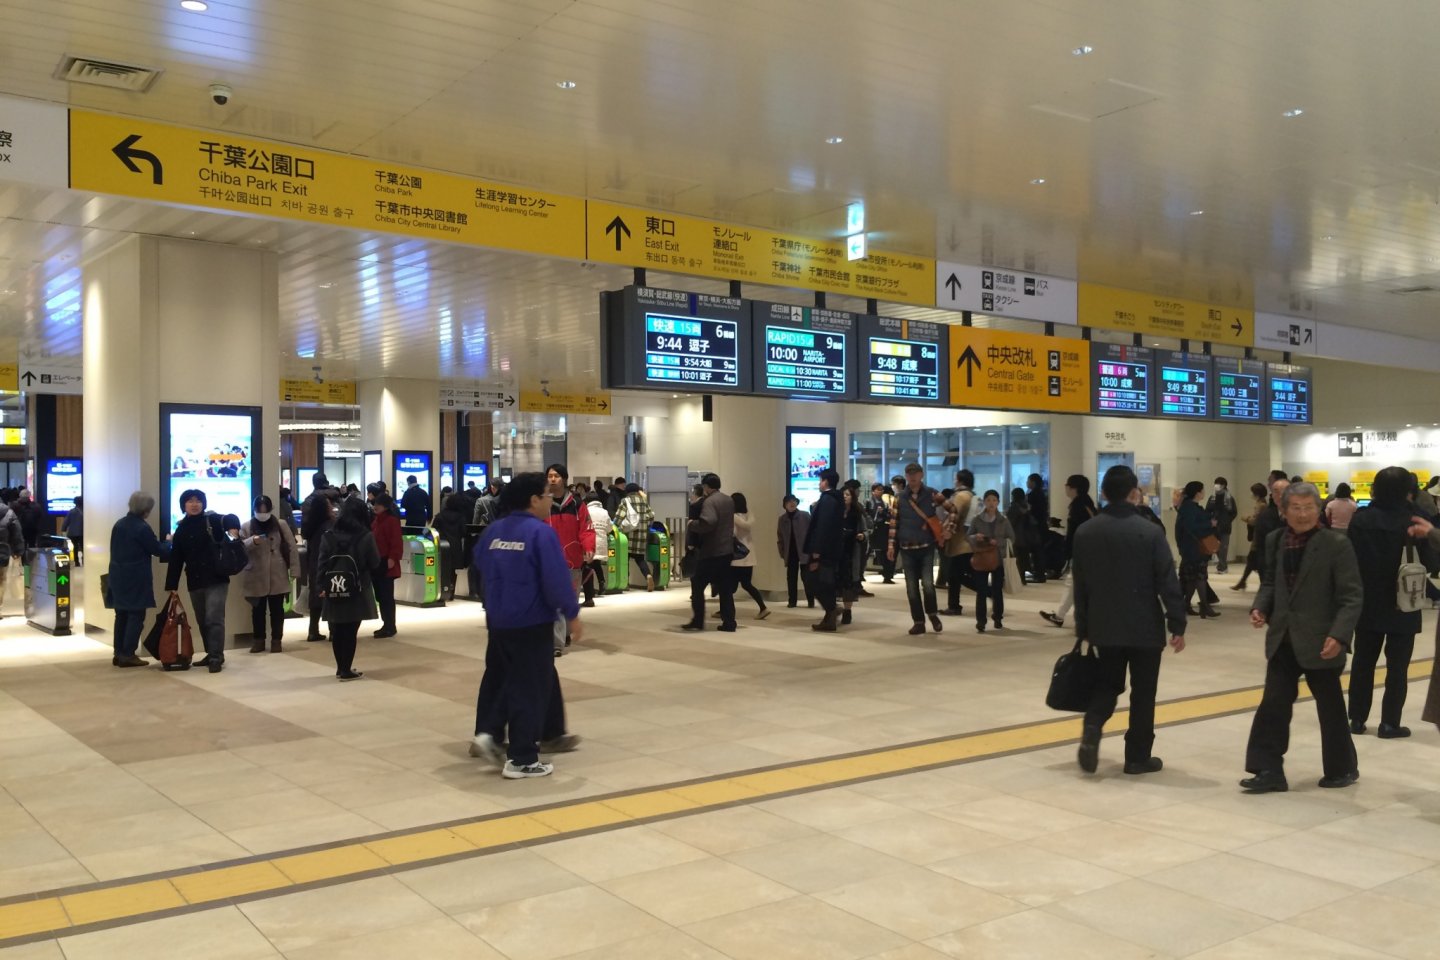 The new Chiba Station area opened Nov. 20 in Chiba City.